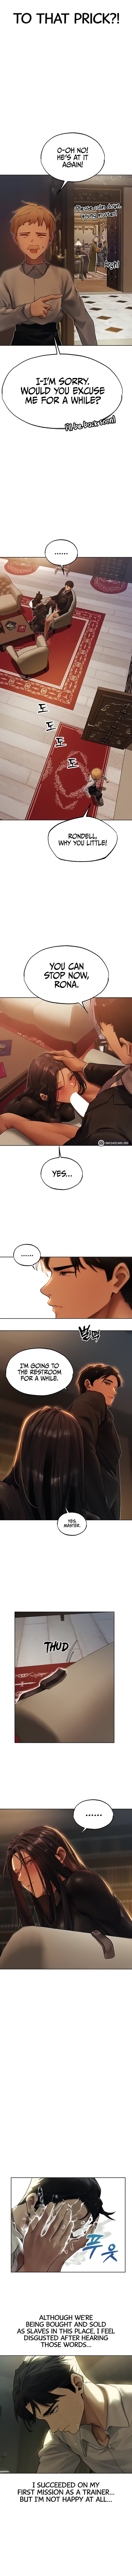 milf-hunting-in-another-world-chap-32-6